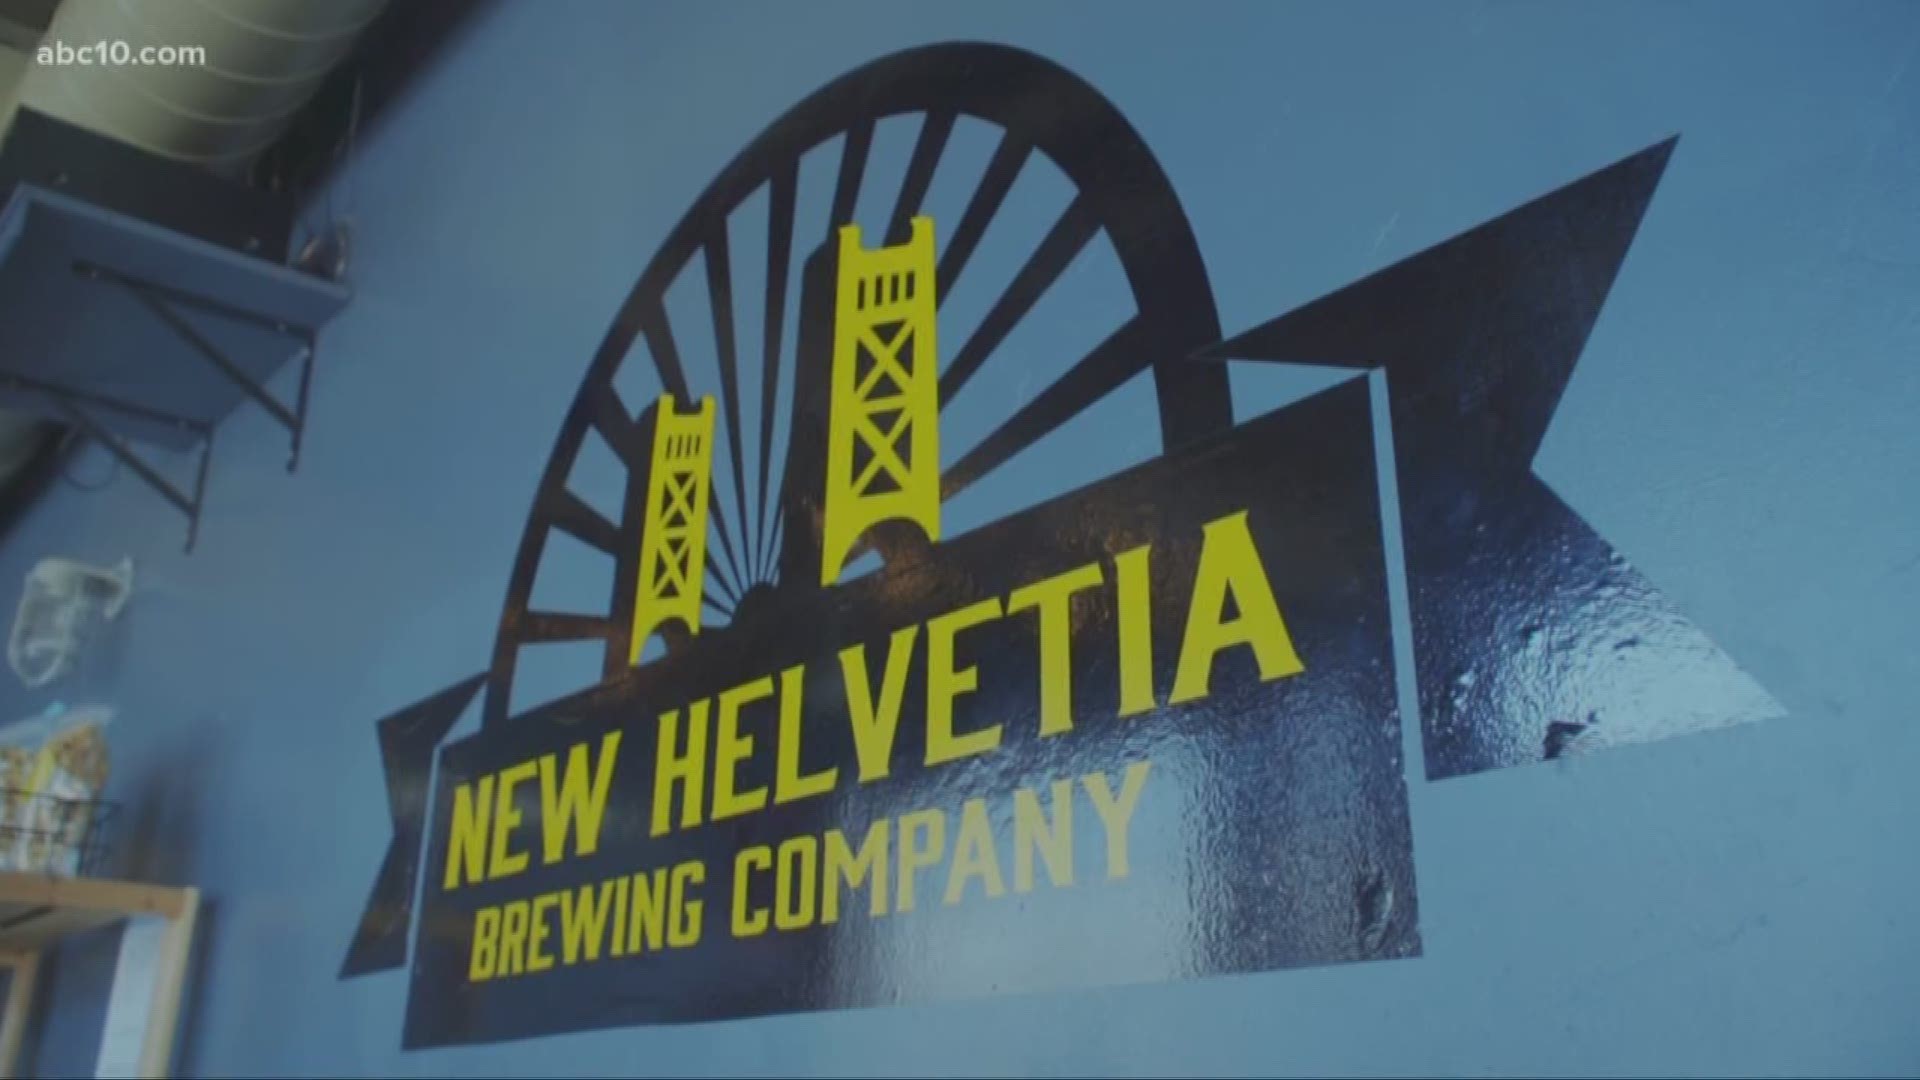 The owner of New Helvetia Brewing Company says there's been a drastic decline in business in the last few months. So he took to social media for community support.